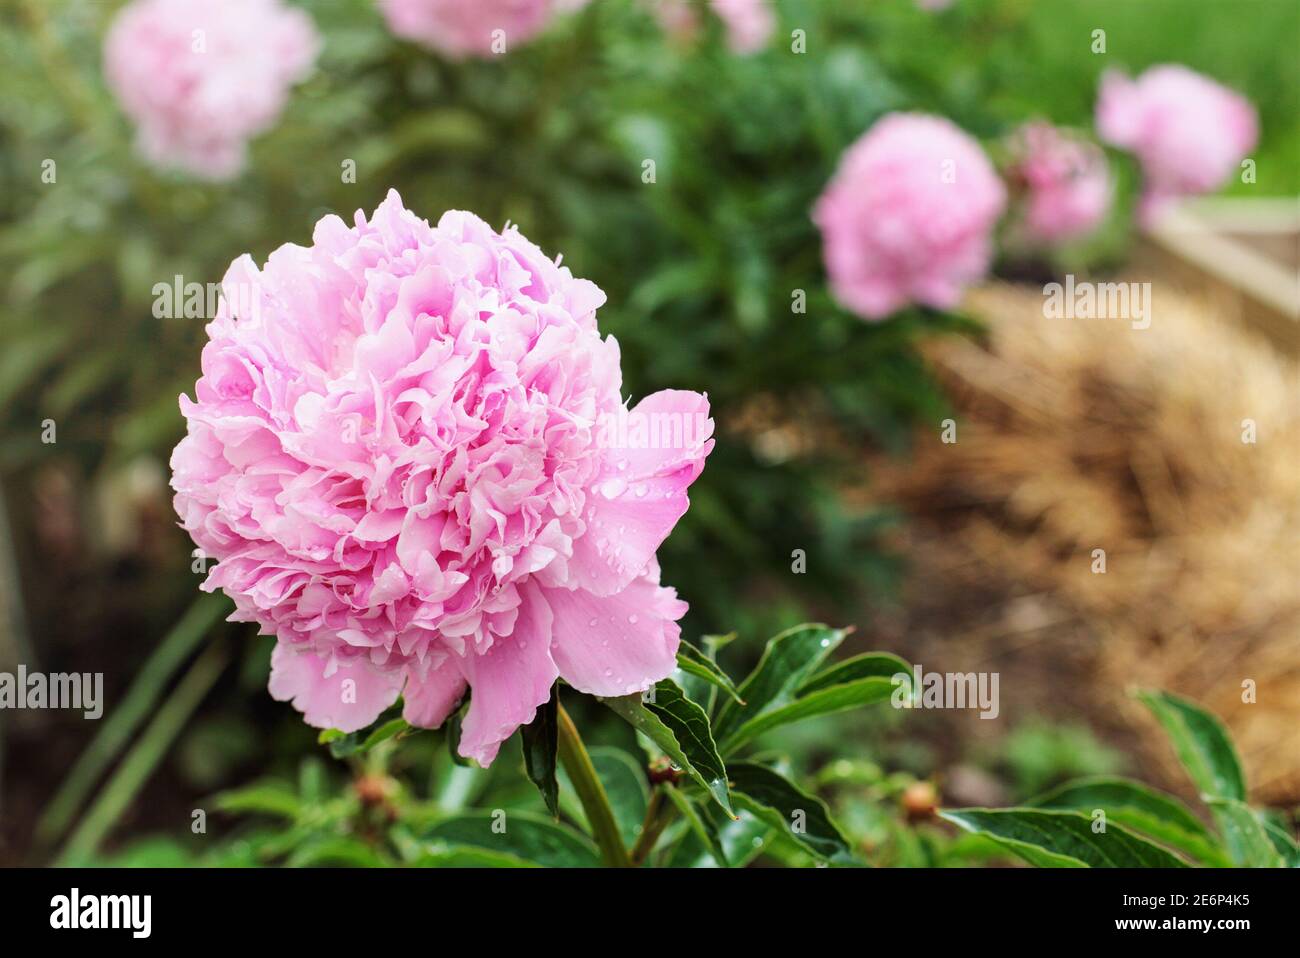 Garden of beautiful blooming pink Peony plants. Selective focus on flower in foreground with blurred background. Stock Photo